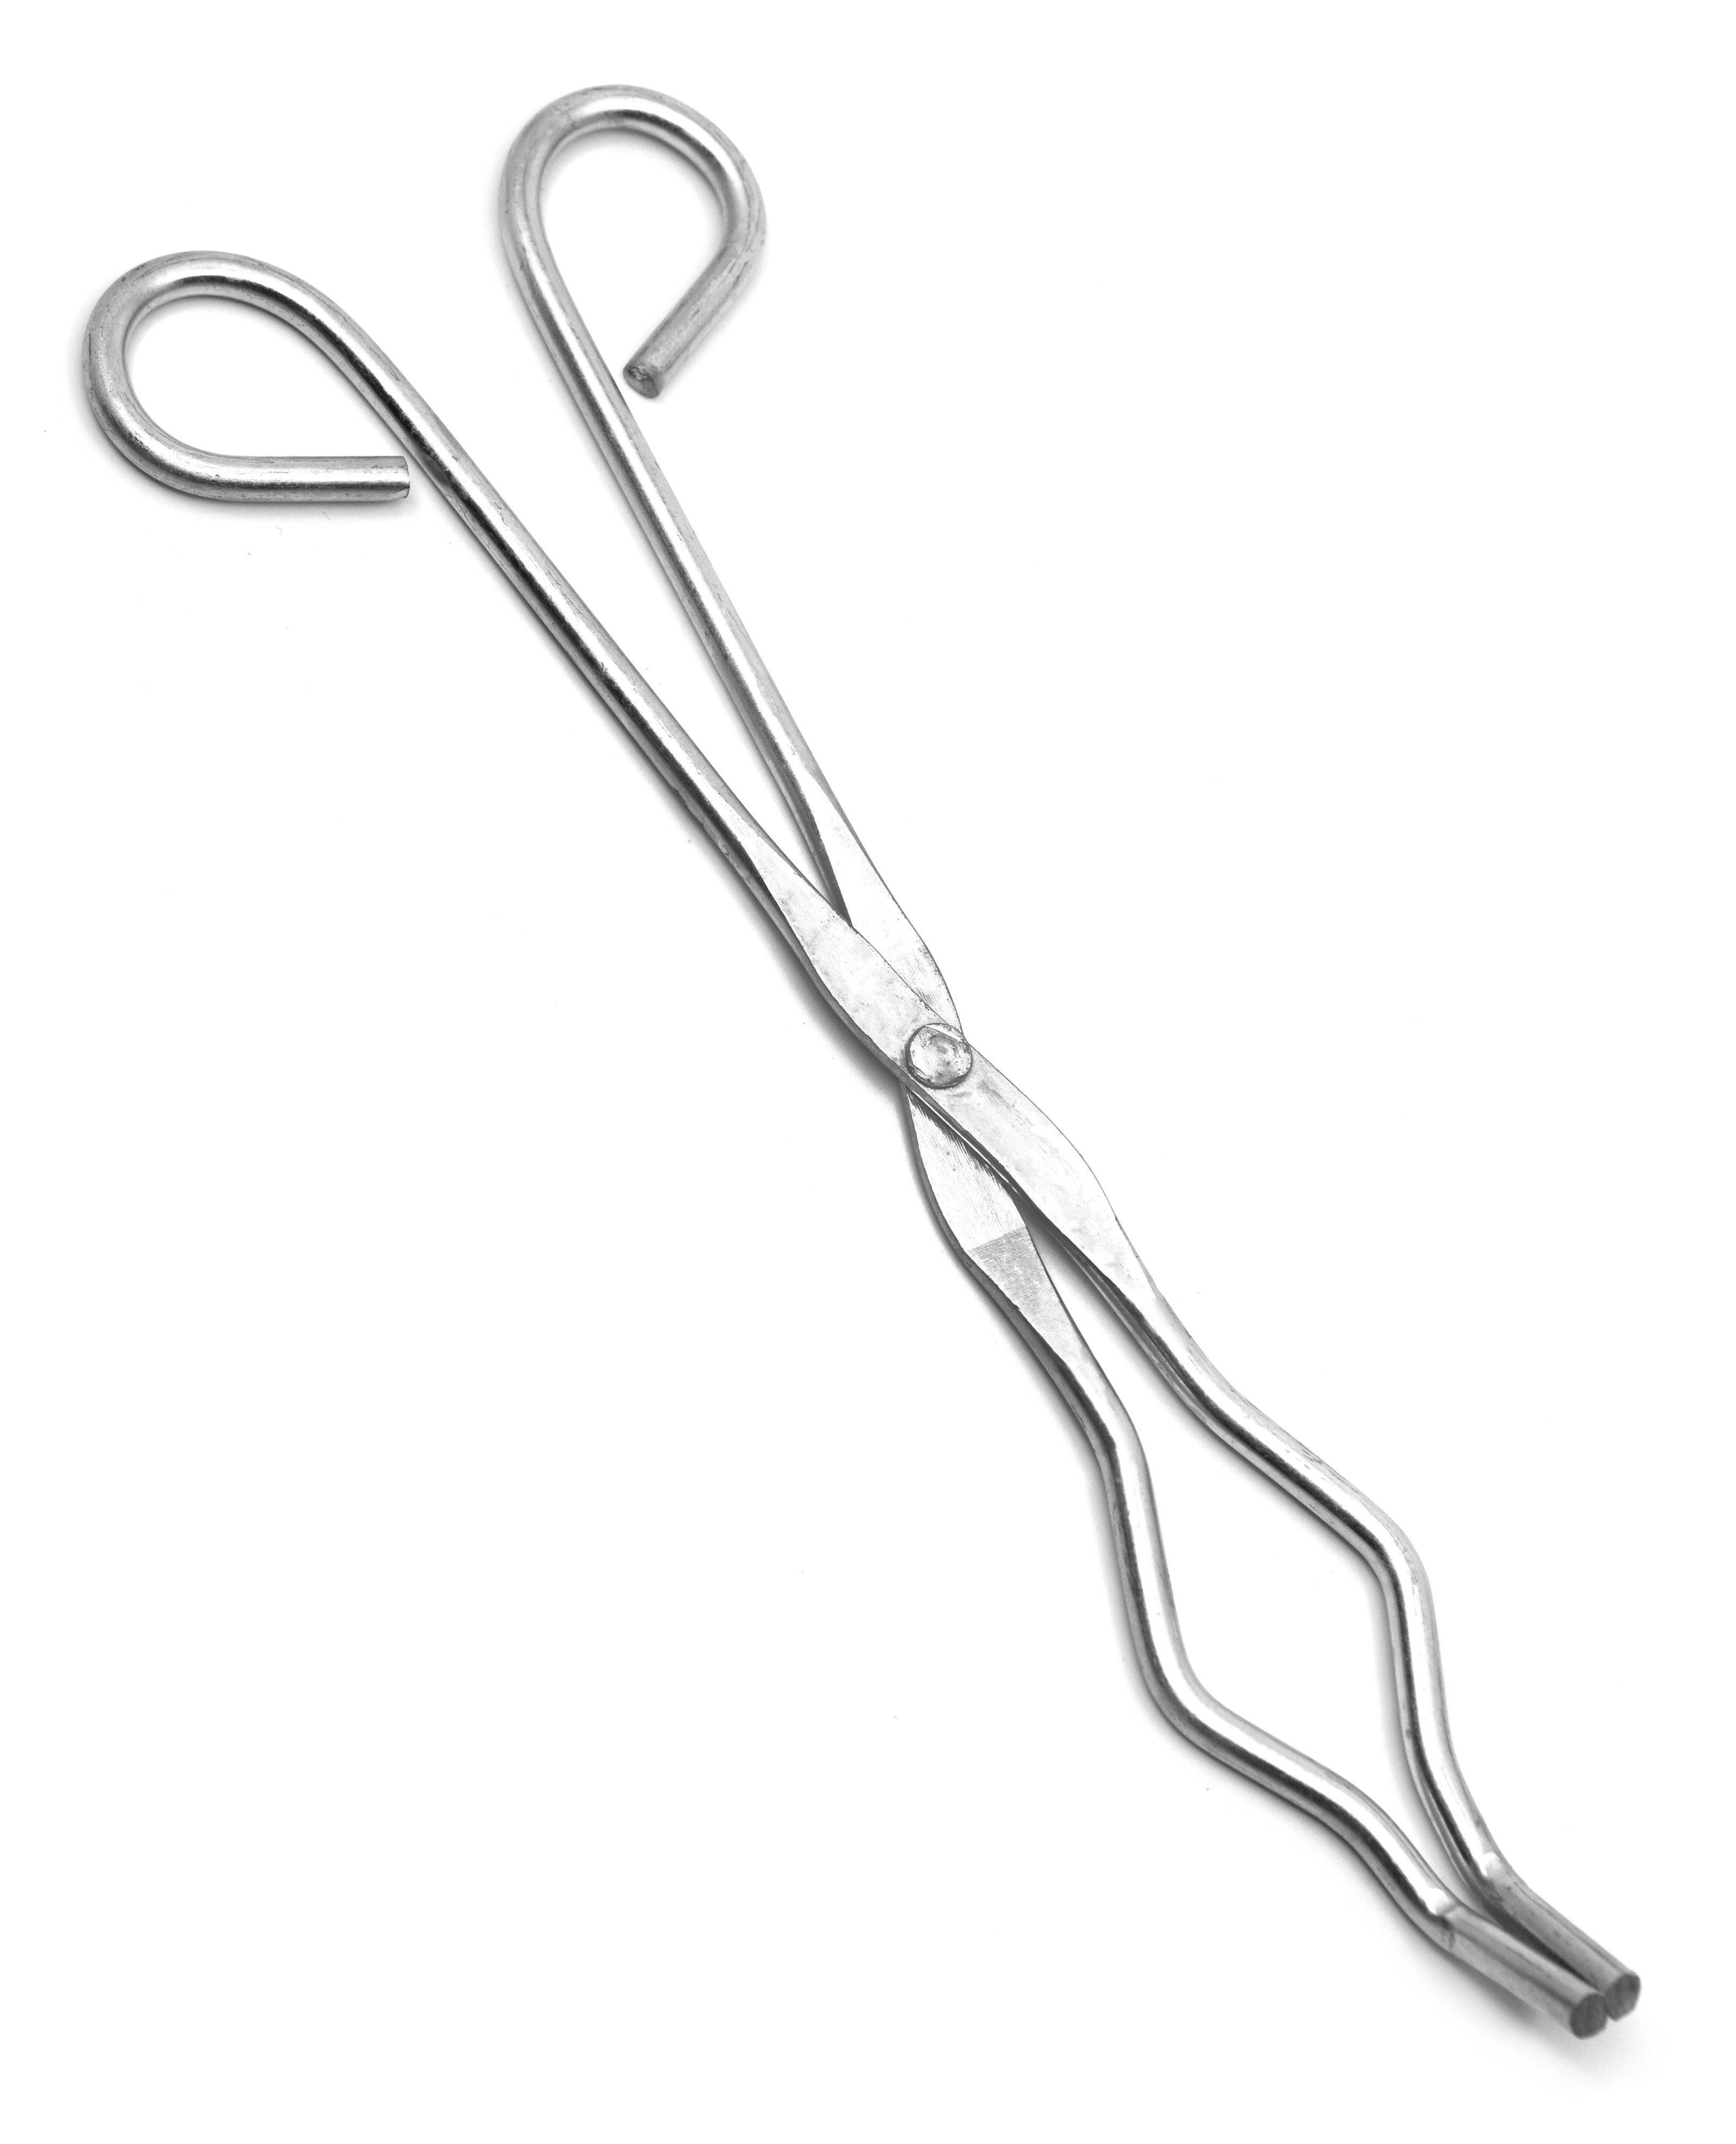 Metal Crucible Tongs with Bow, Straight, Serrated Tips, 9.5" long